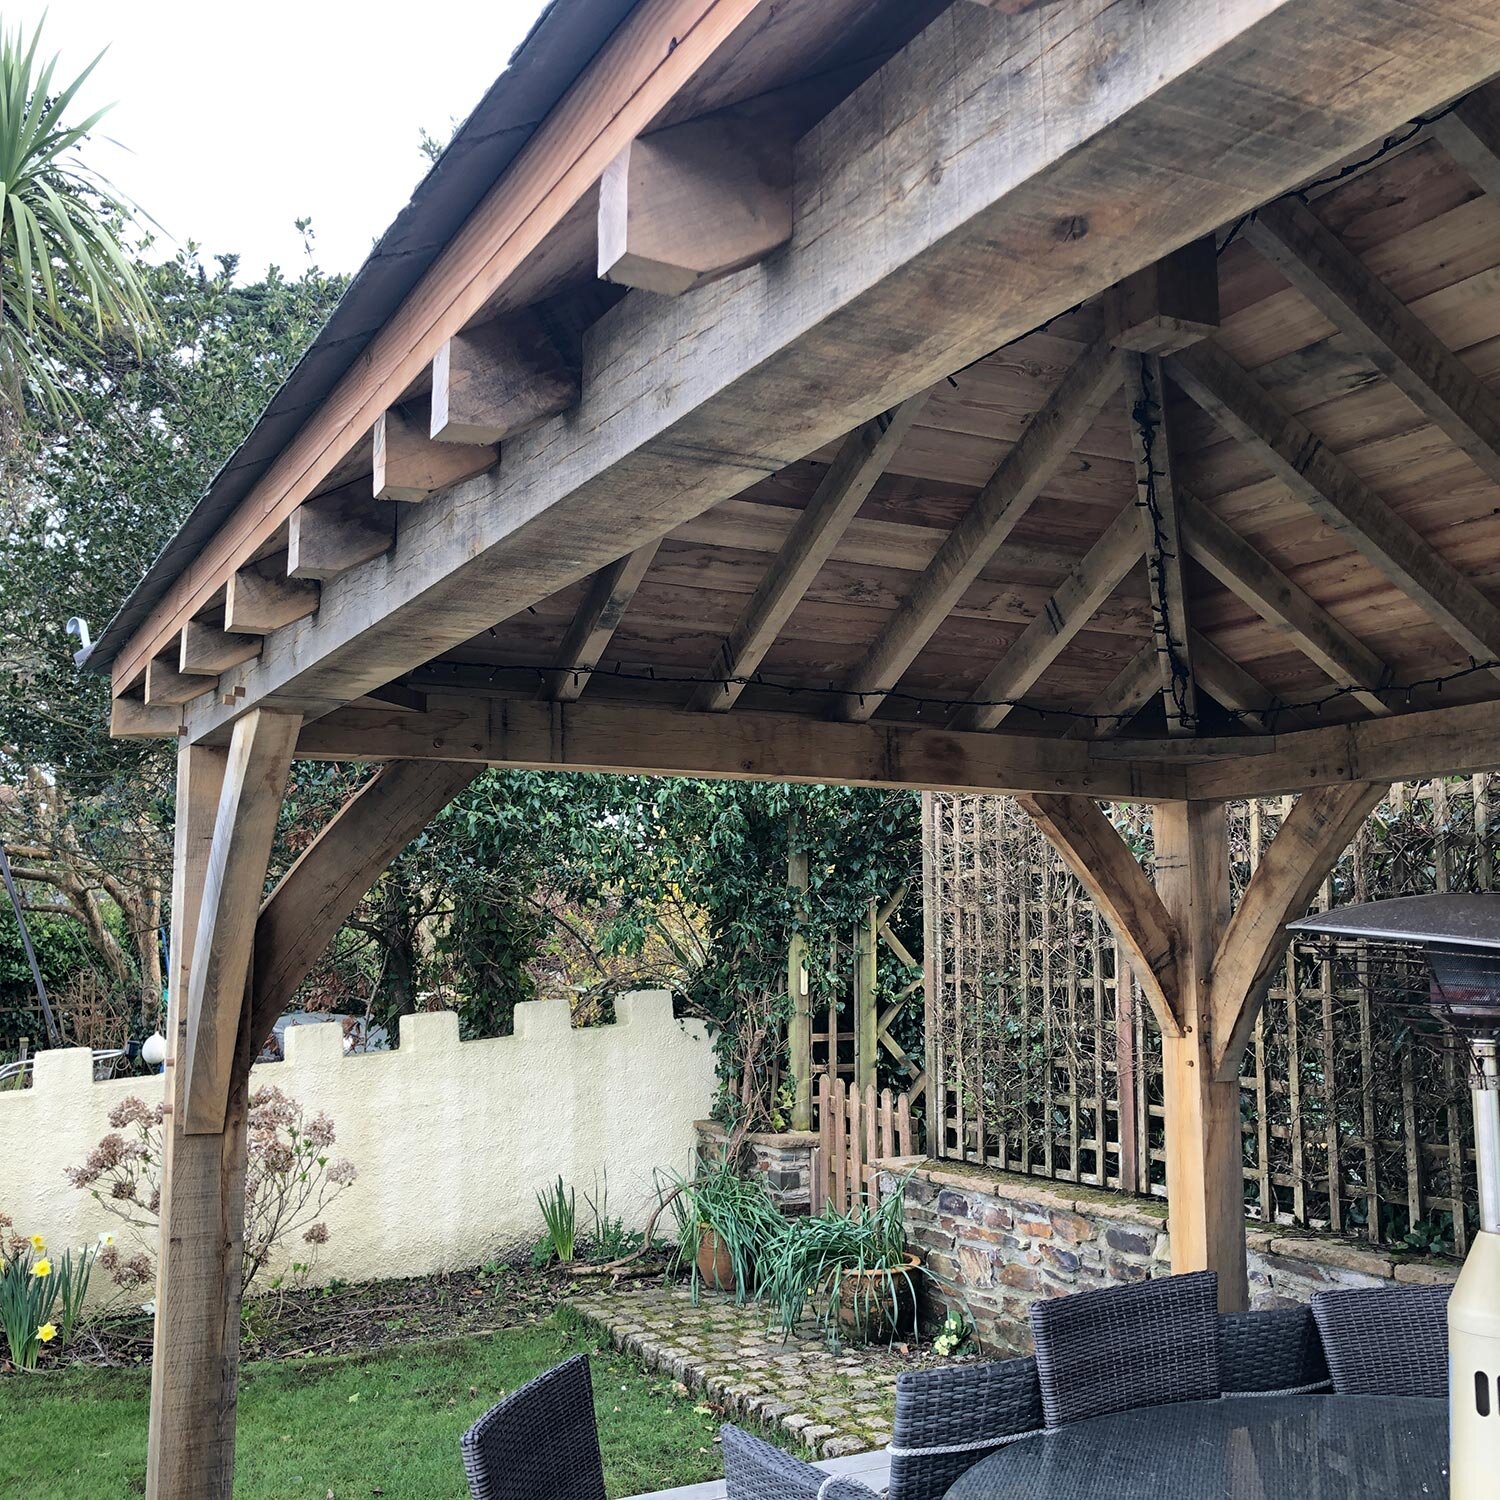 Green oak trusses and rafters providing shelter for garden dining space